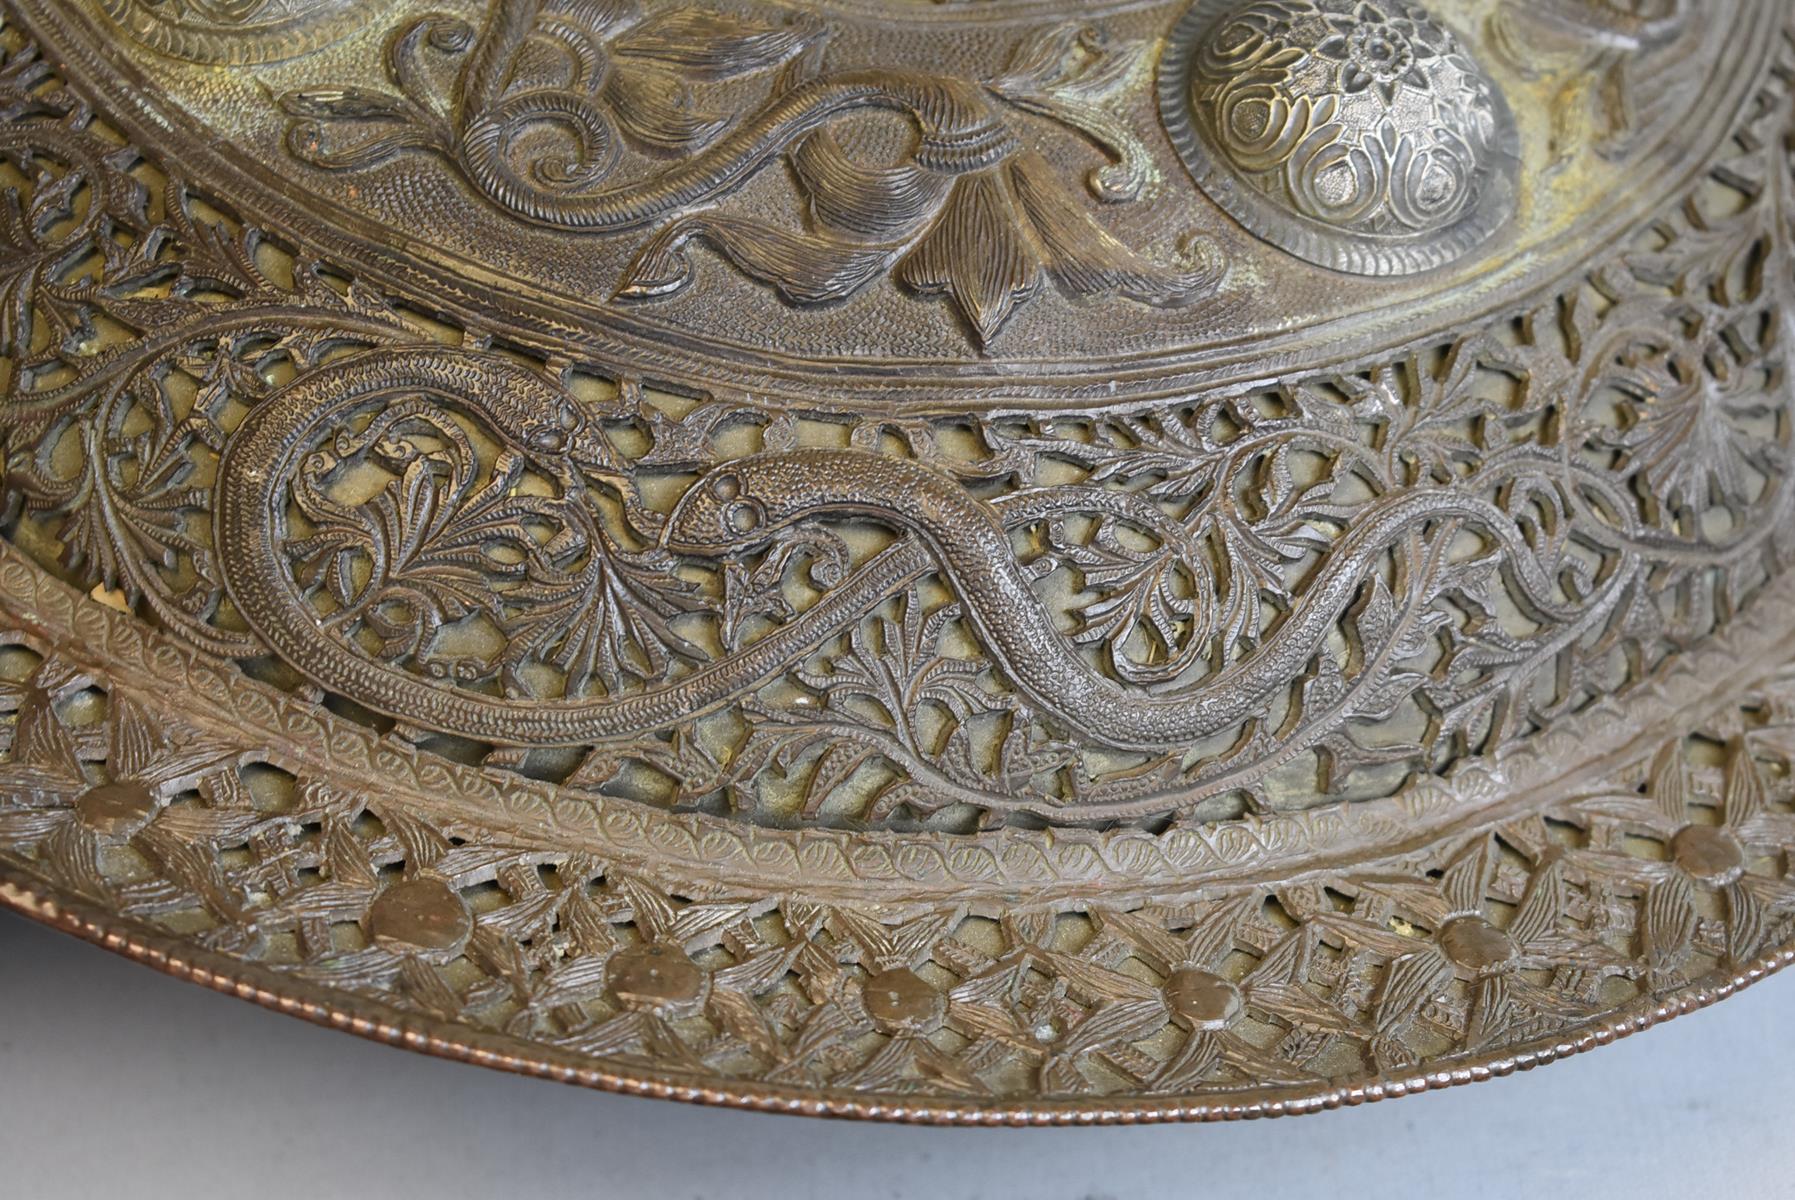 A FINE OTTOMAN DHAL OR SHIELD, 35.5cm diameter body overlaid with a finely pierced outer decorated - Image 8 of 9